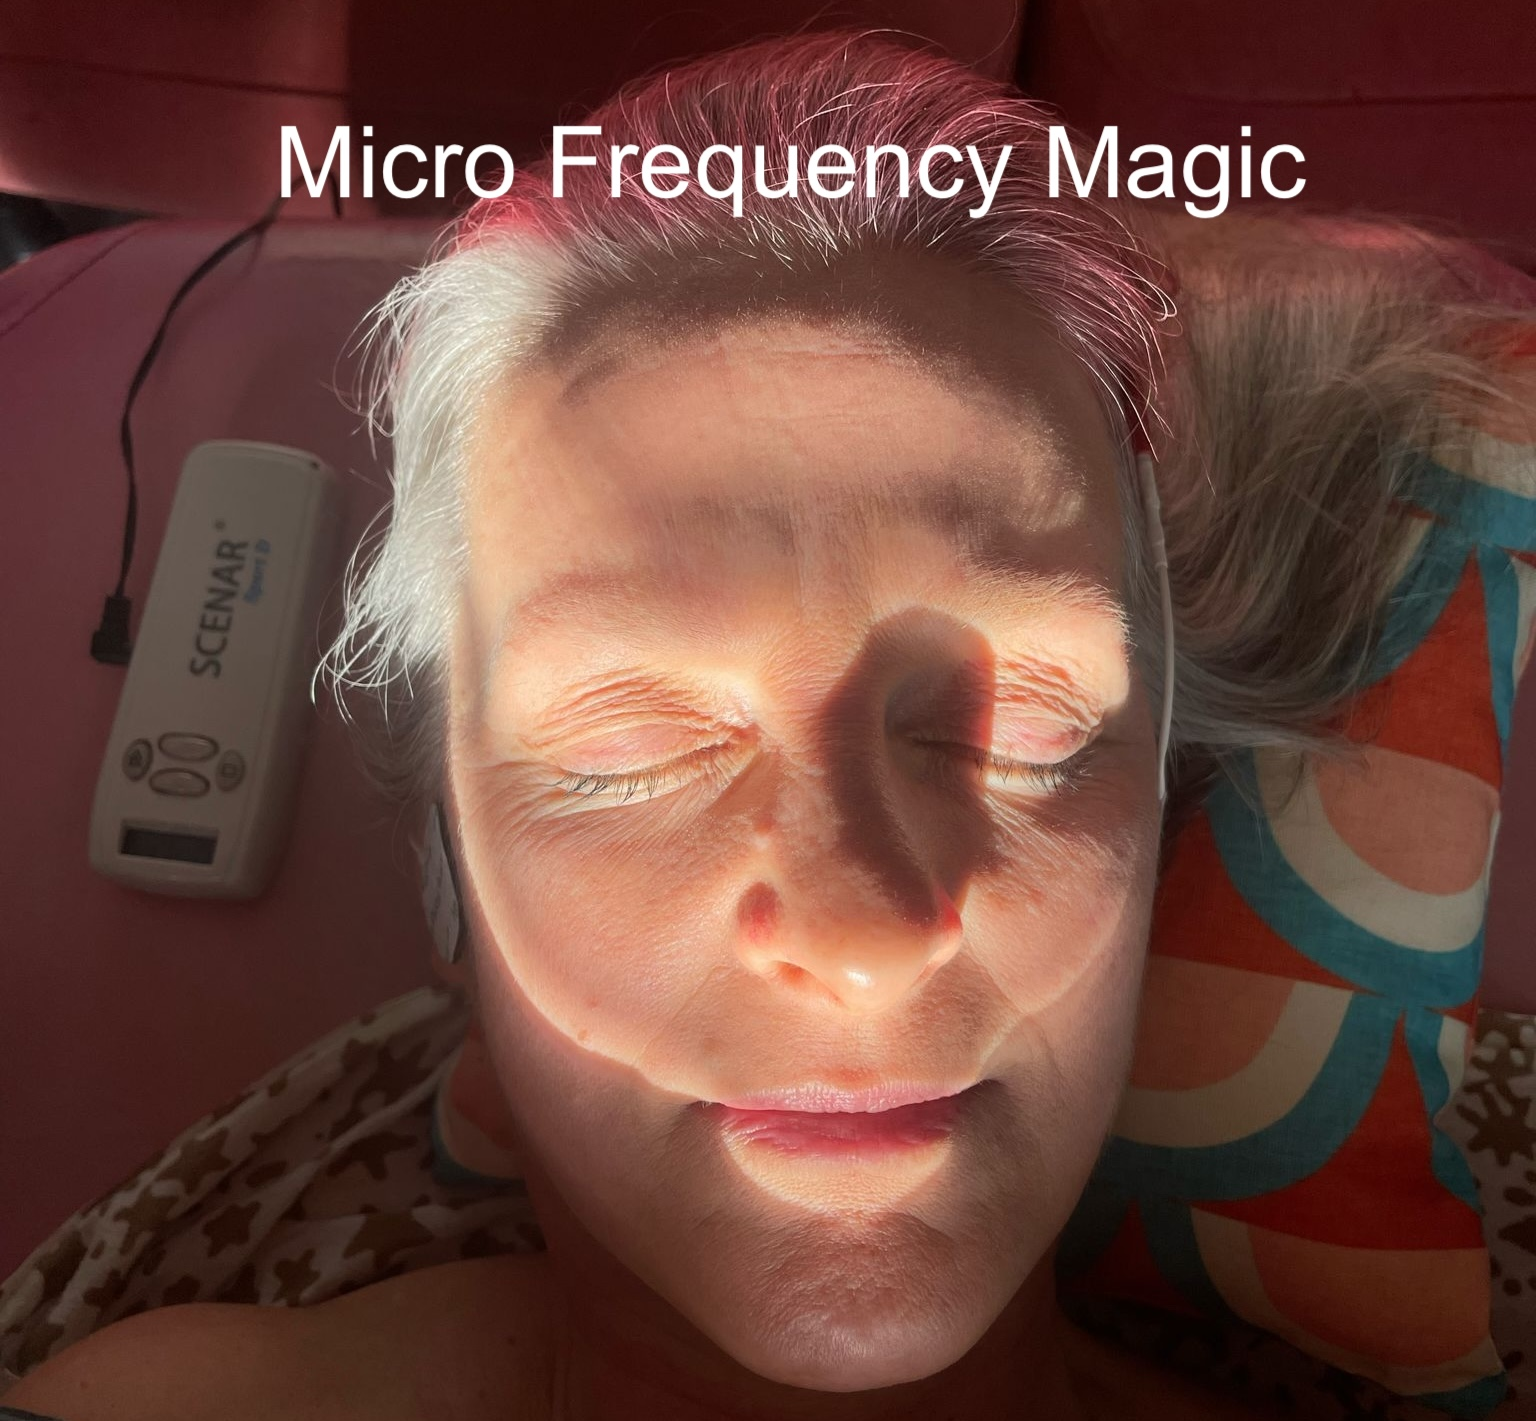 Micro Frequency Magic : Scenar Therapy with Jenna Presley